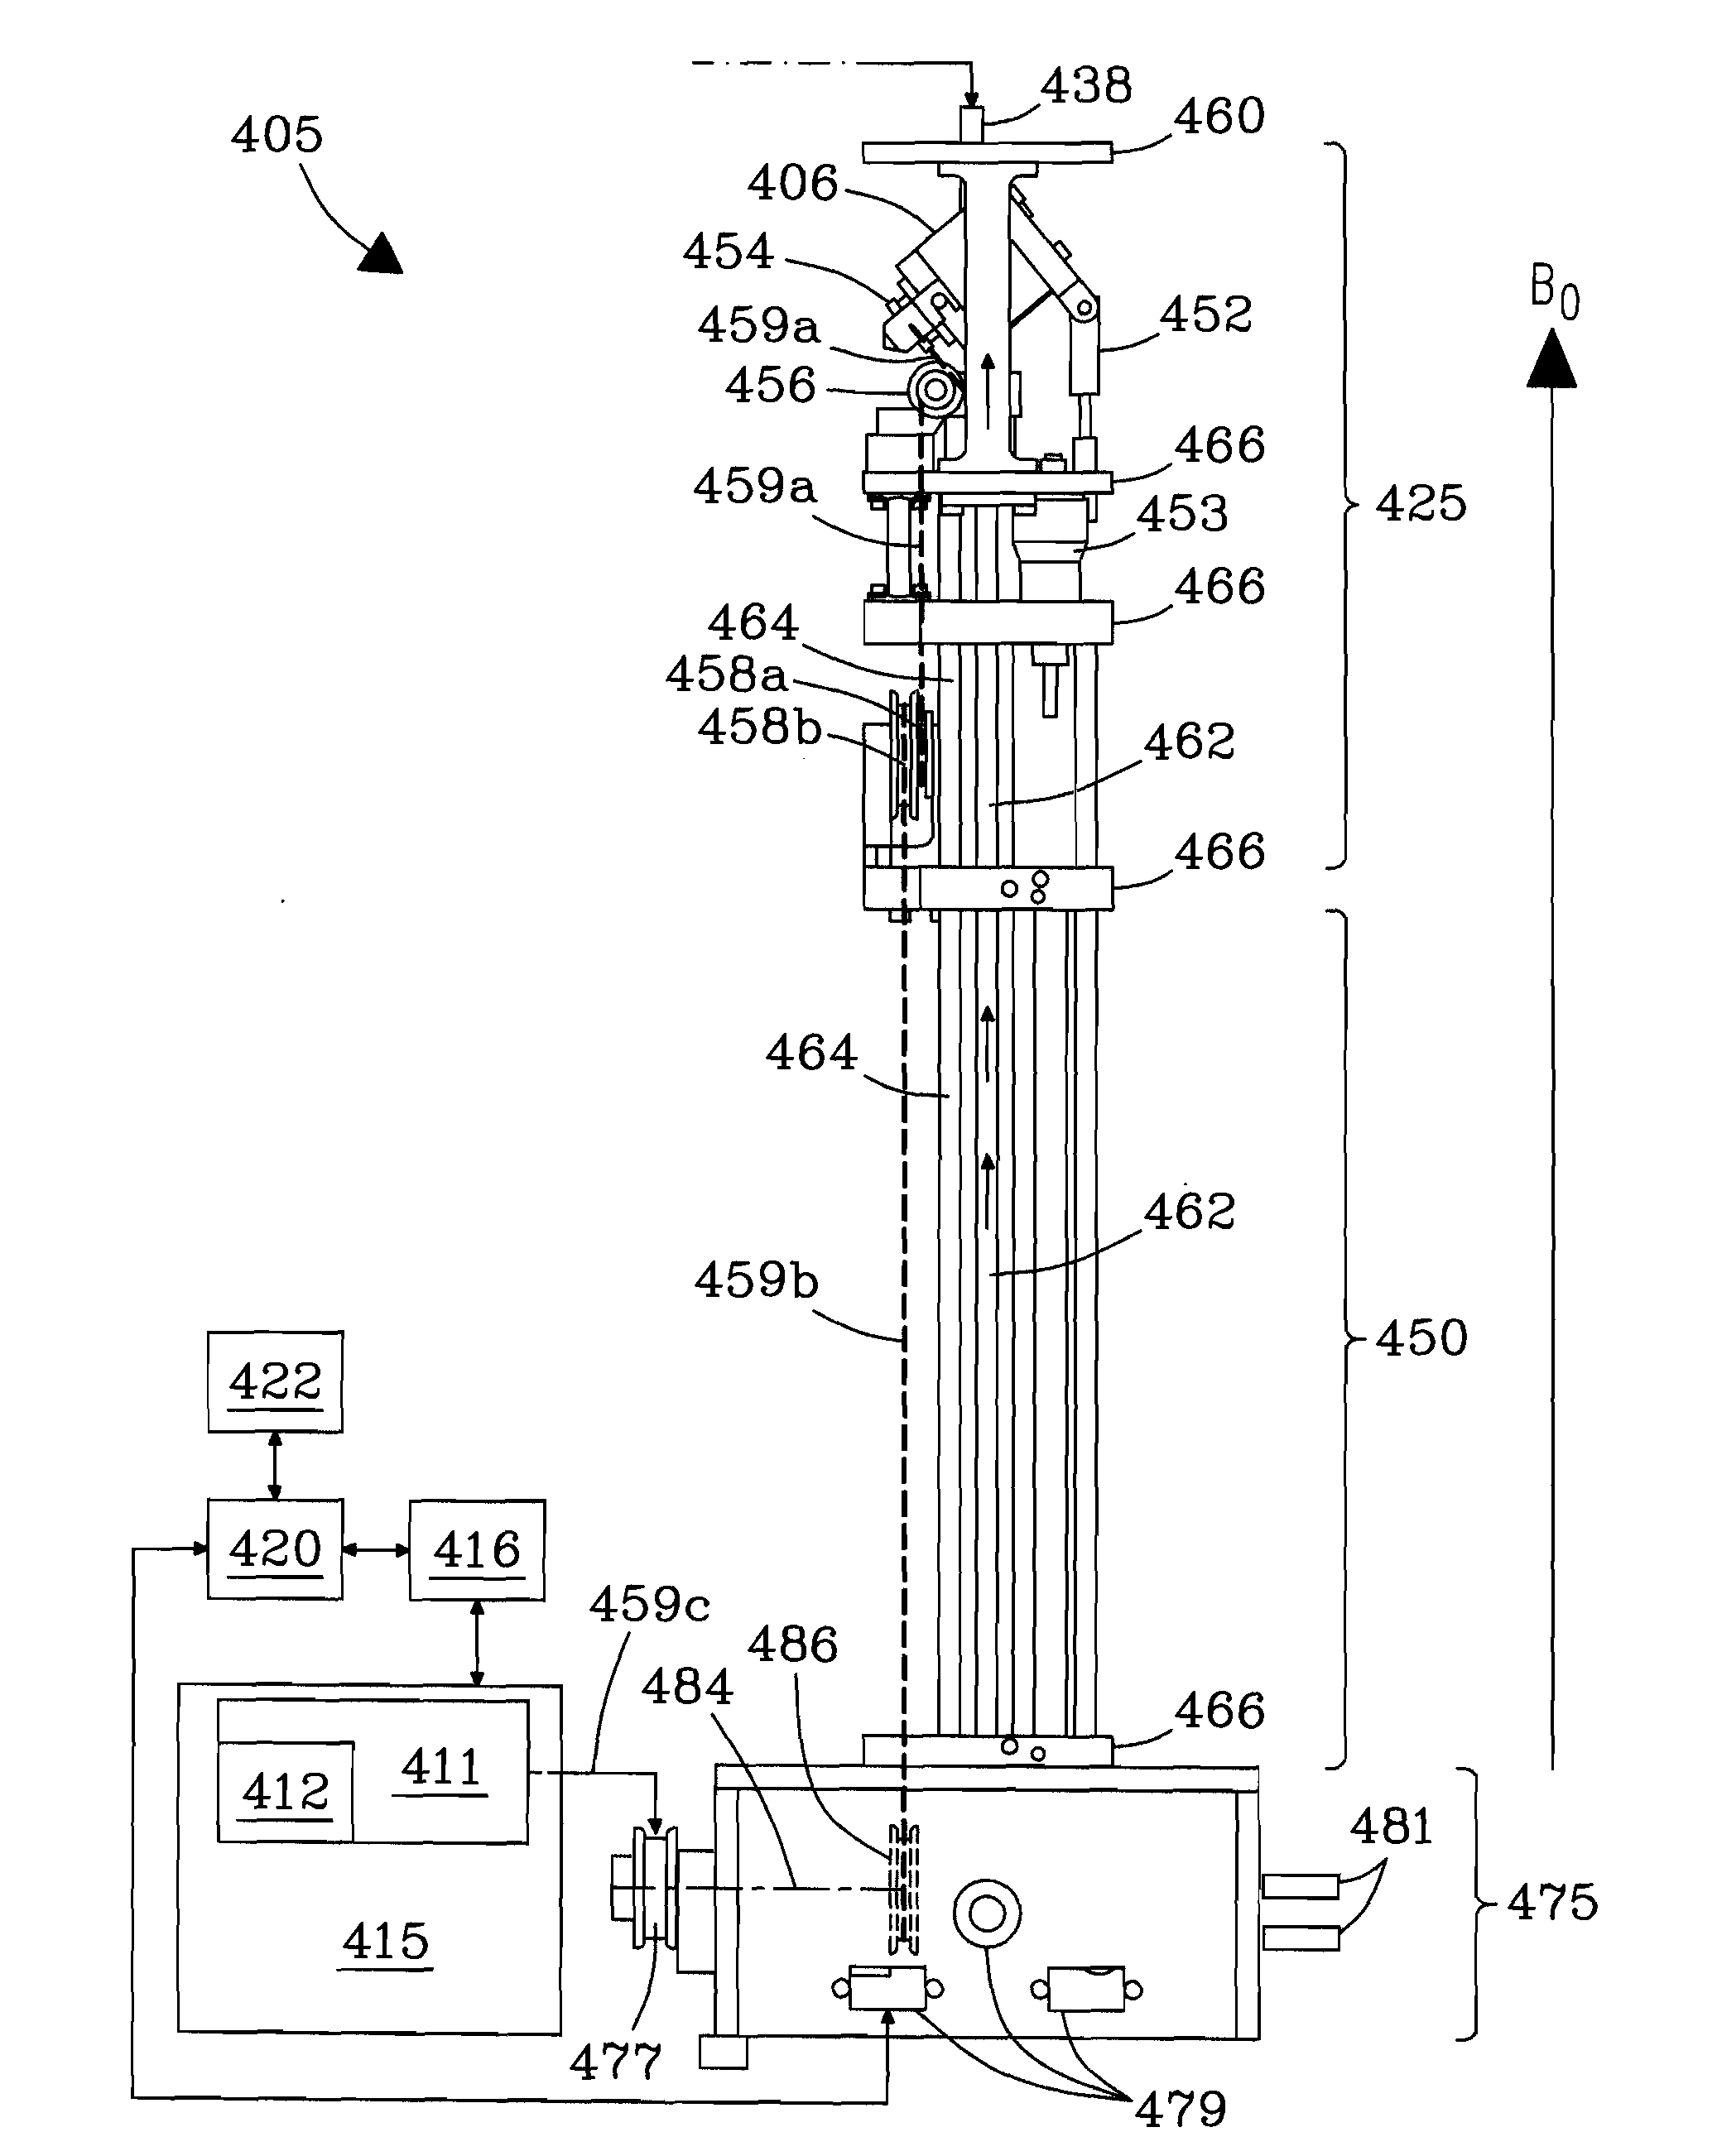 Discrete magic angle turning system, apparatus, and process for in situ magnetic resonance spectroscopy and imaging